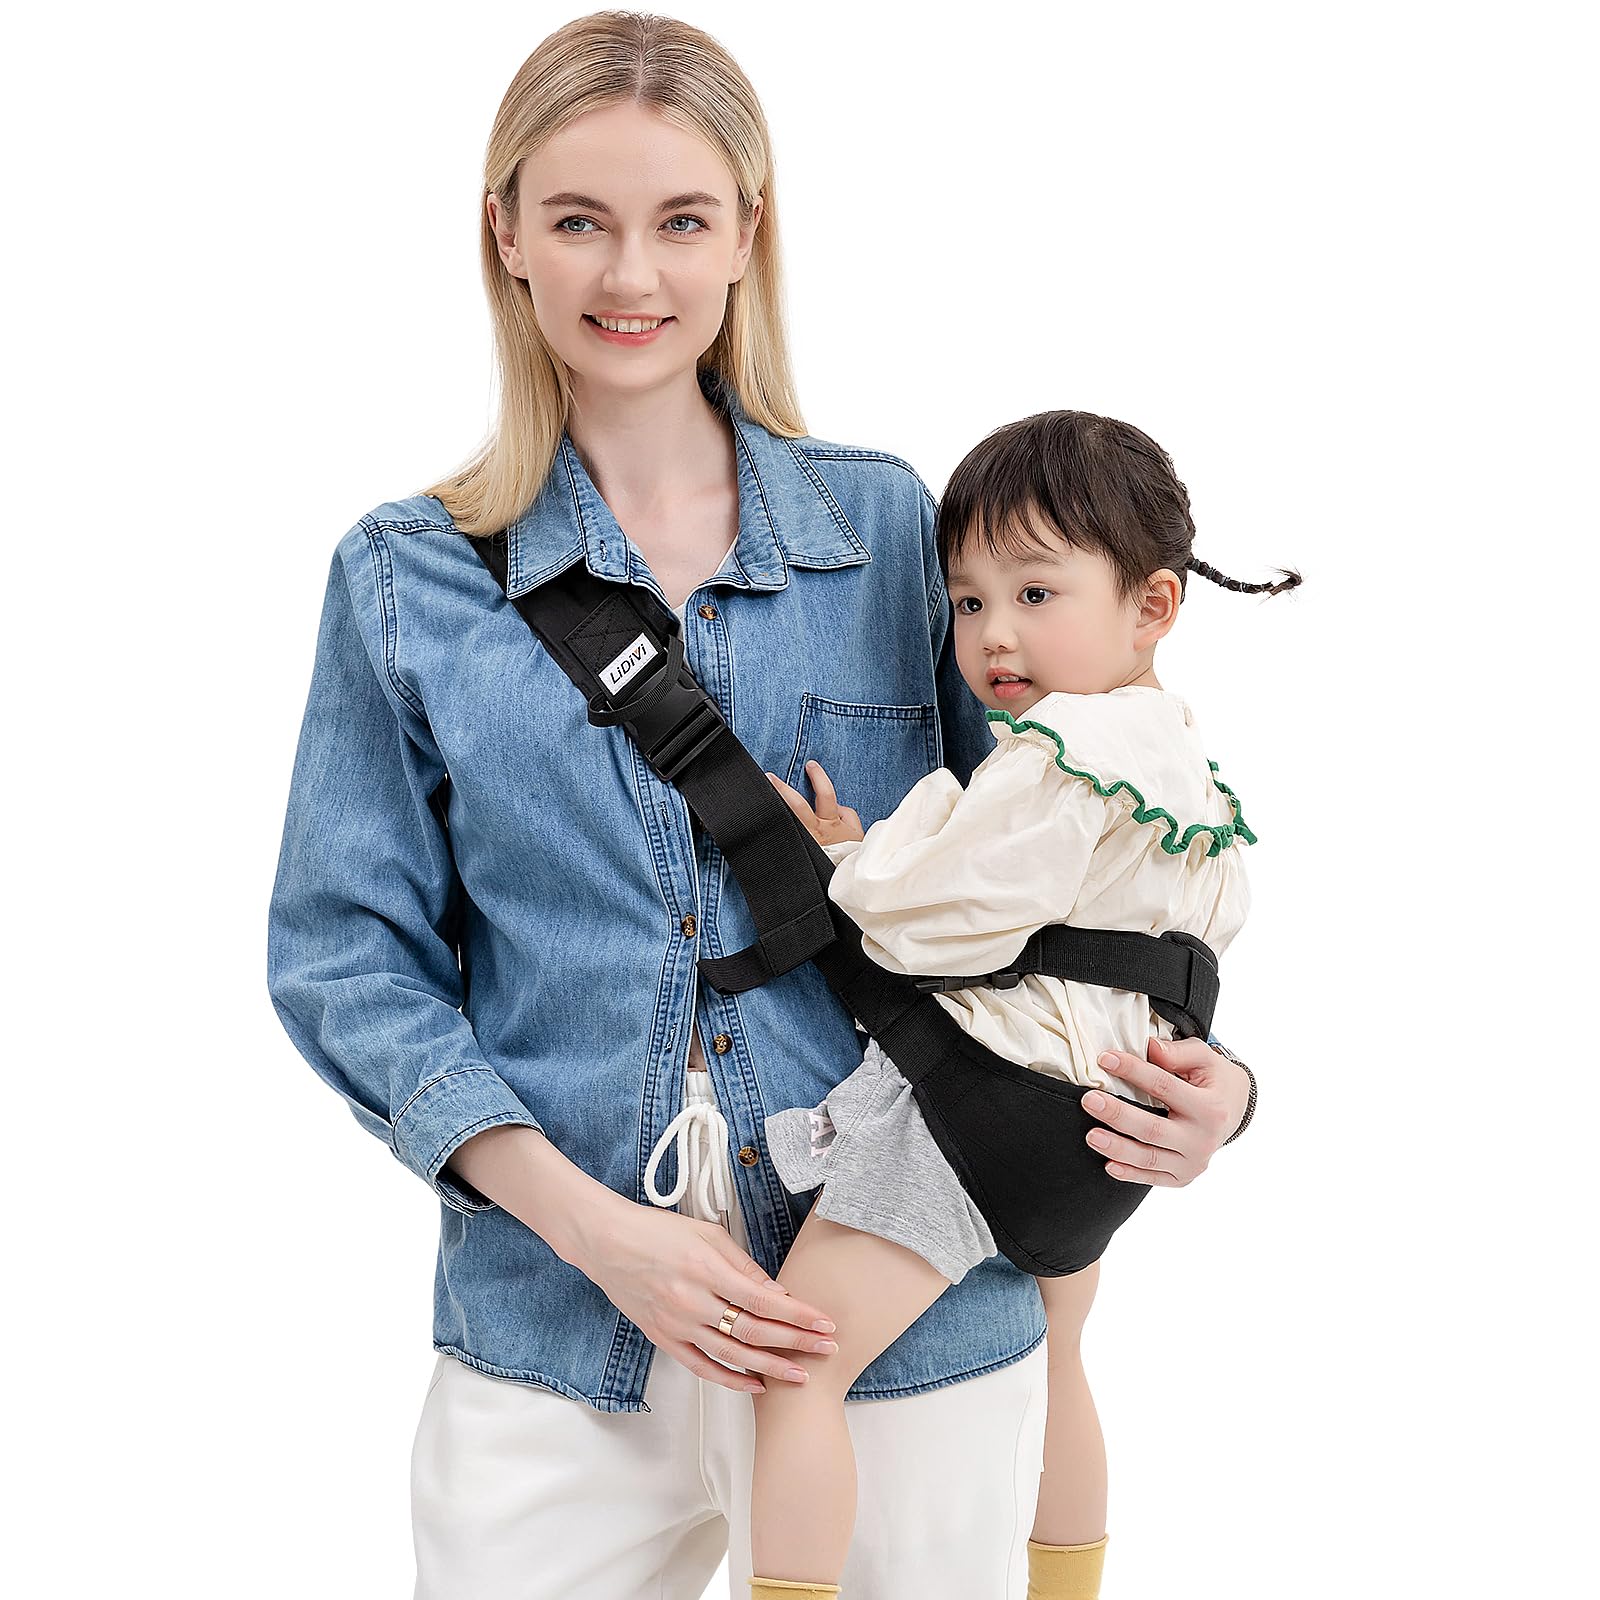 Baby Carrier, Portable Toddler Carrier for Child Infant with Belt Protection, Adjustable Long Waistband & Ergonomic No-Slipped Seat Perfect for 6-48 Months Baby - Black